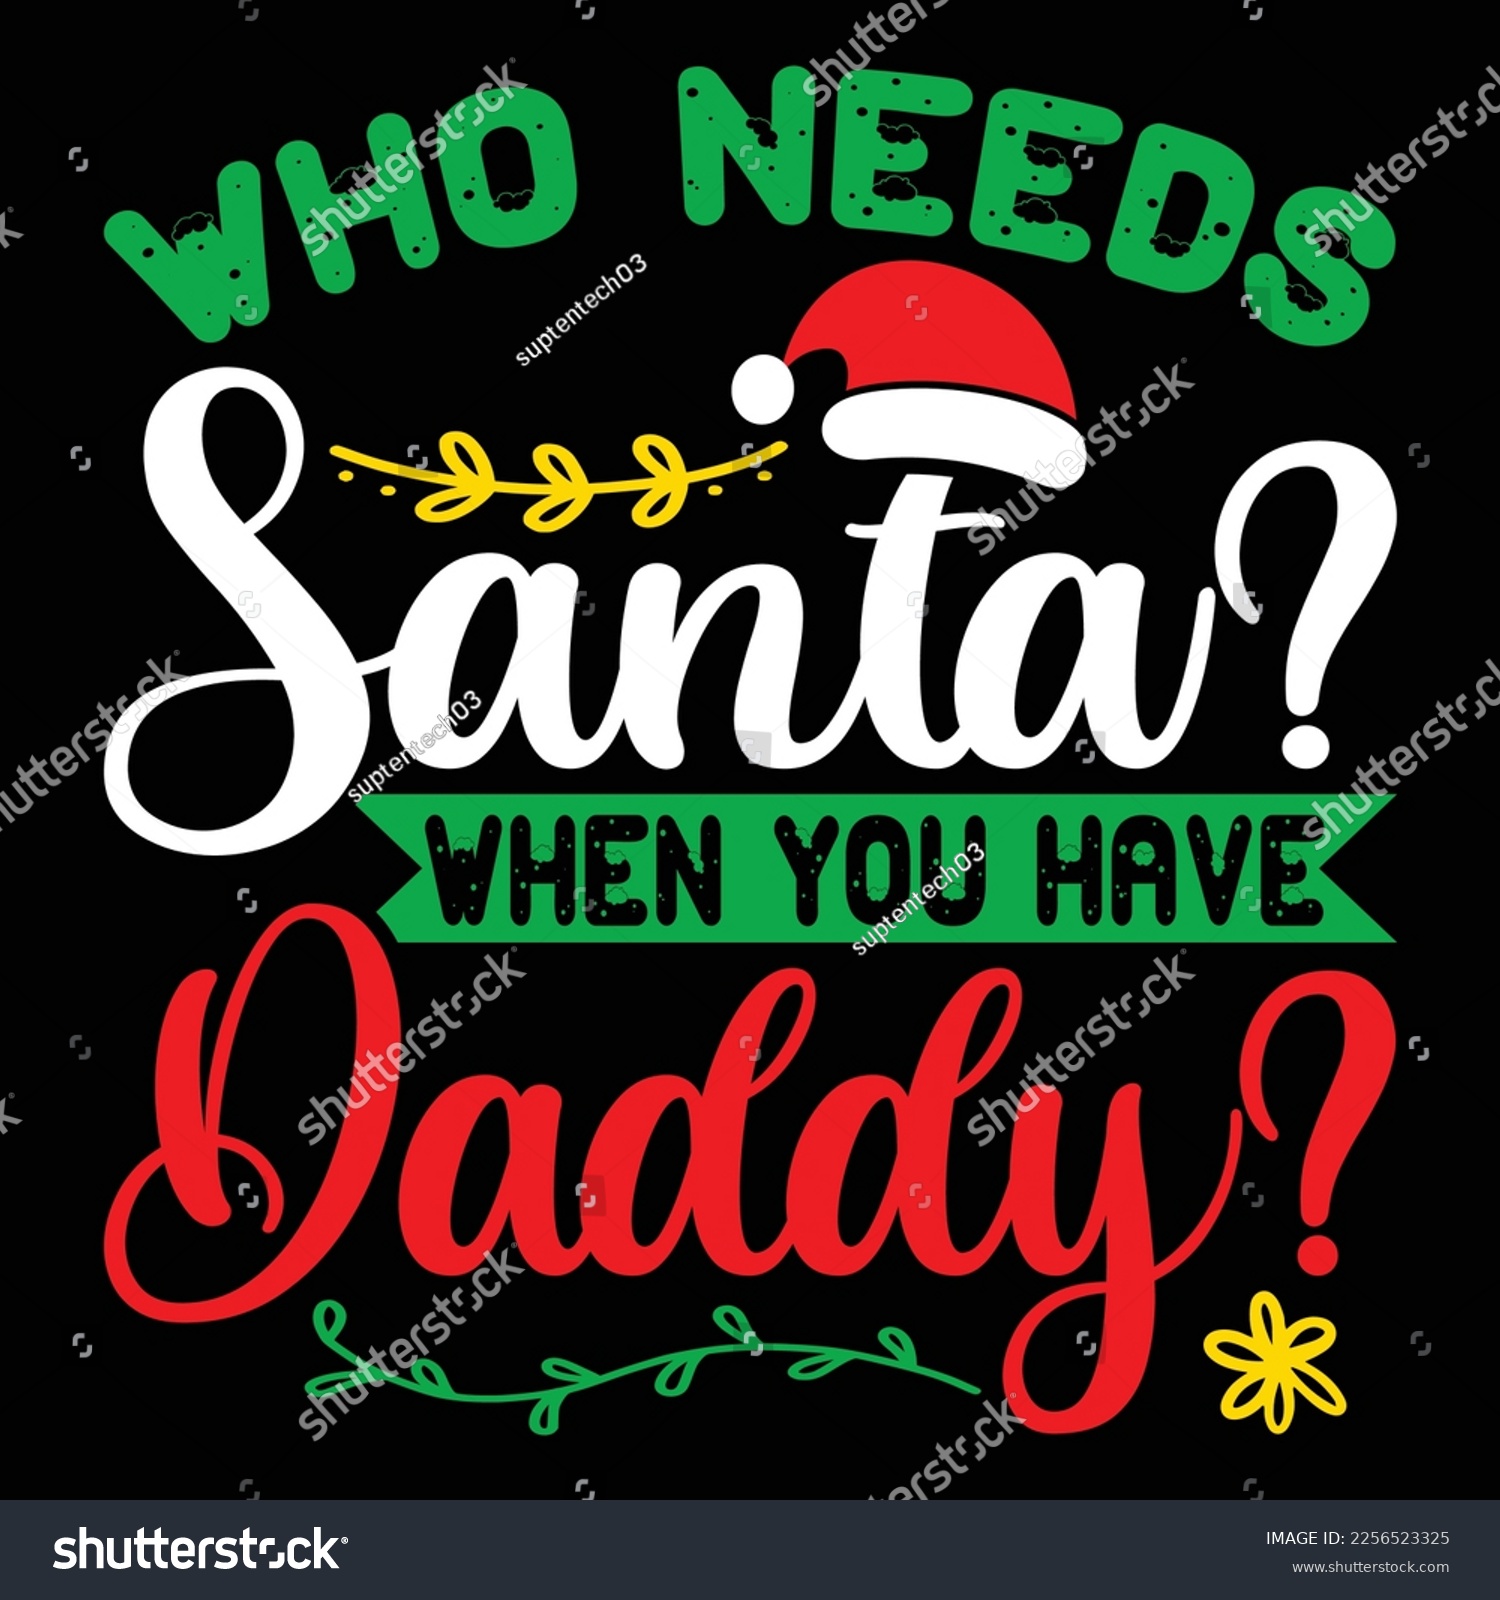 SVG of Who Needs Santa When You Have Daddy, Merry Christmas shirts Print Template, Xmas Ugly Snow Santa Clouse New Year Holiday Candy Santa Hat vector illustration for Christmas hand lettered svg